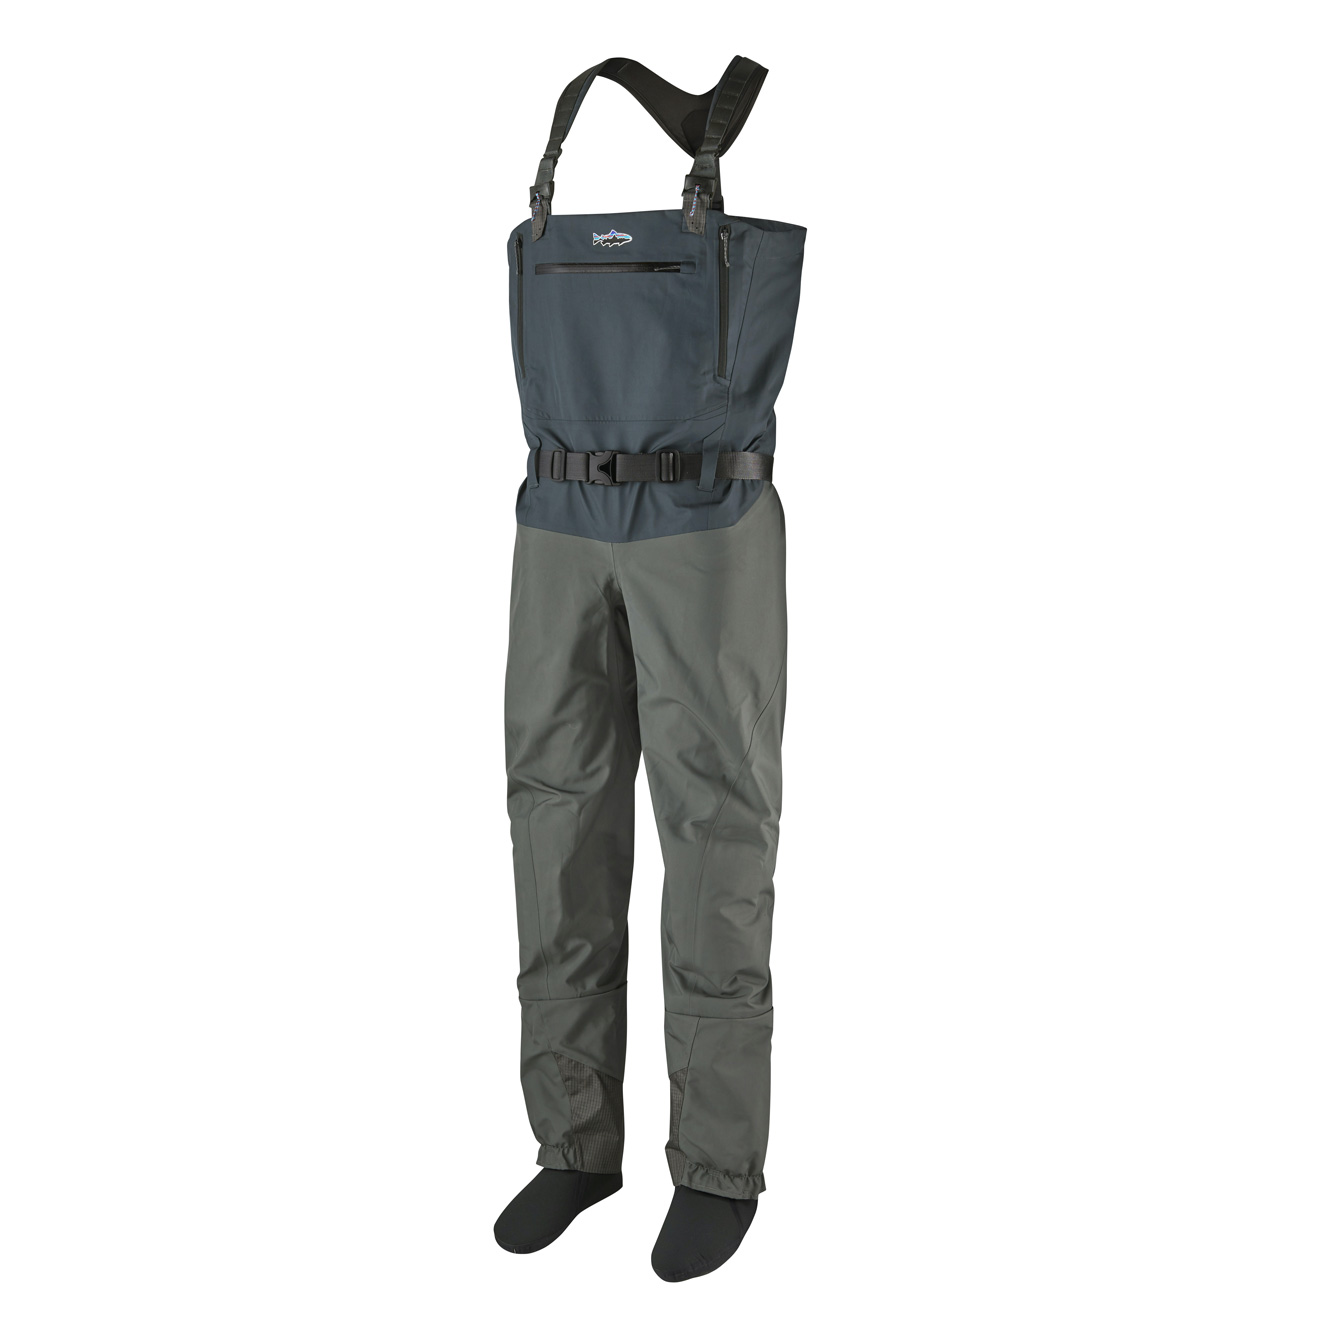 Patagonia Men's Swiftcurrent Expedition Wader - MRL